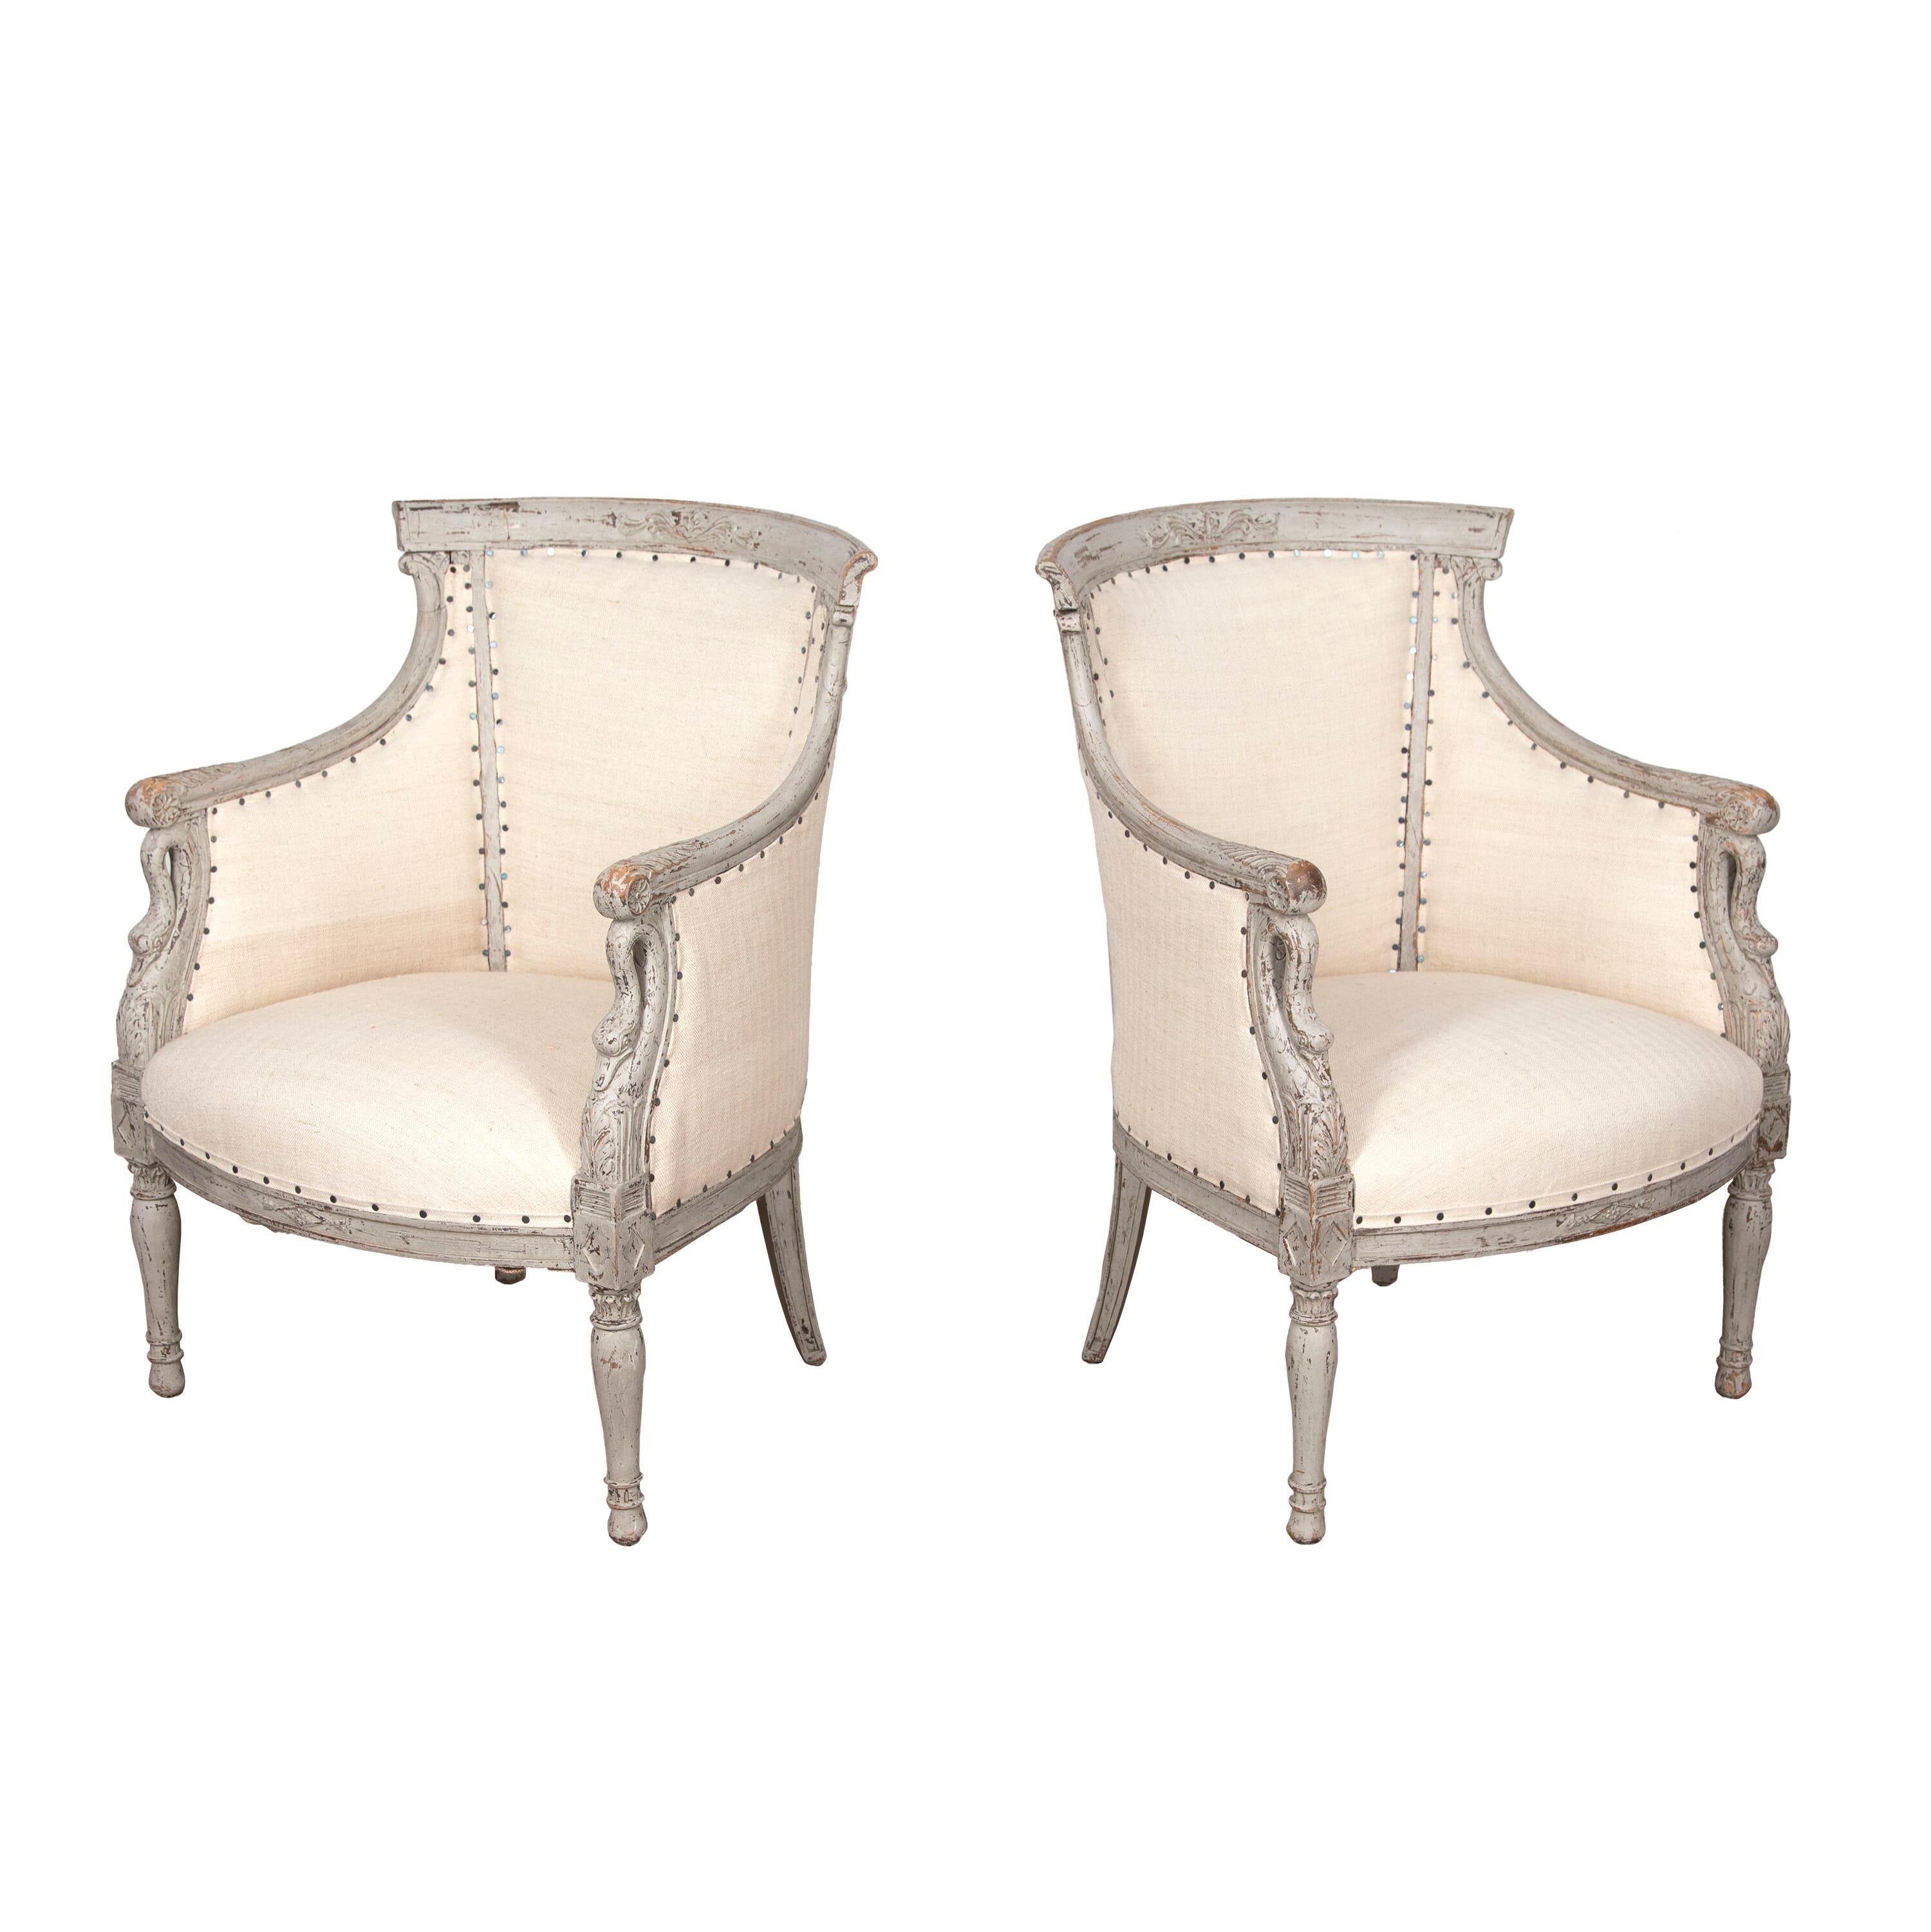 Pair of 19th century Swedish carved wooden chairs. 
With decorative detailing to the arms, and curtailing to swans.
Both are repainted and reupholstered in antique hemp.
Circa 1850.